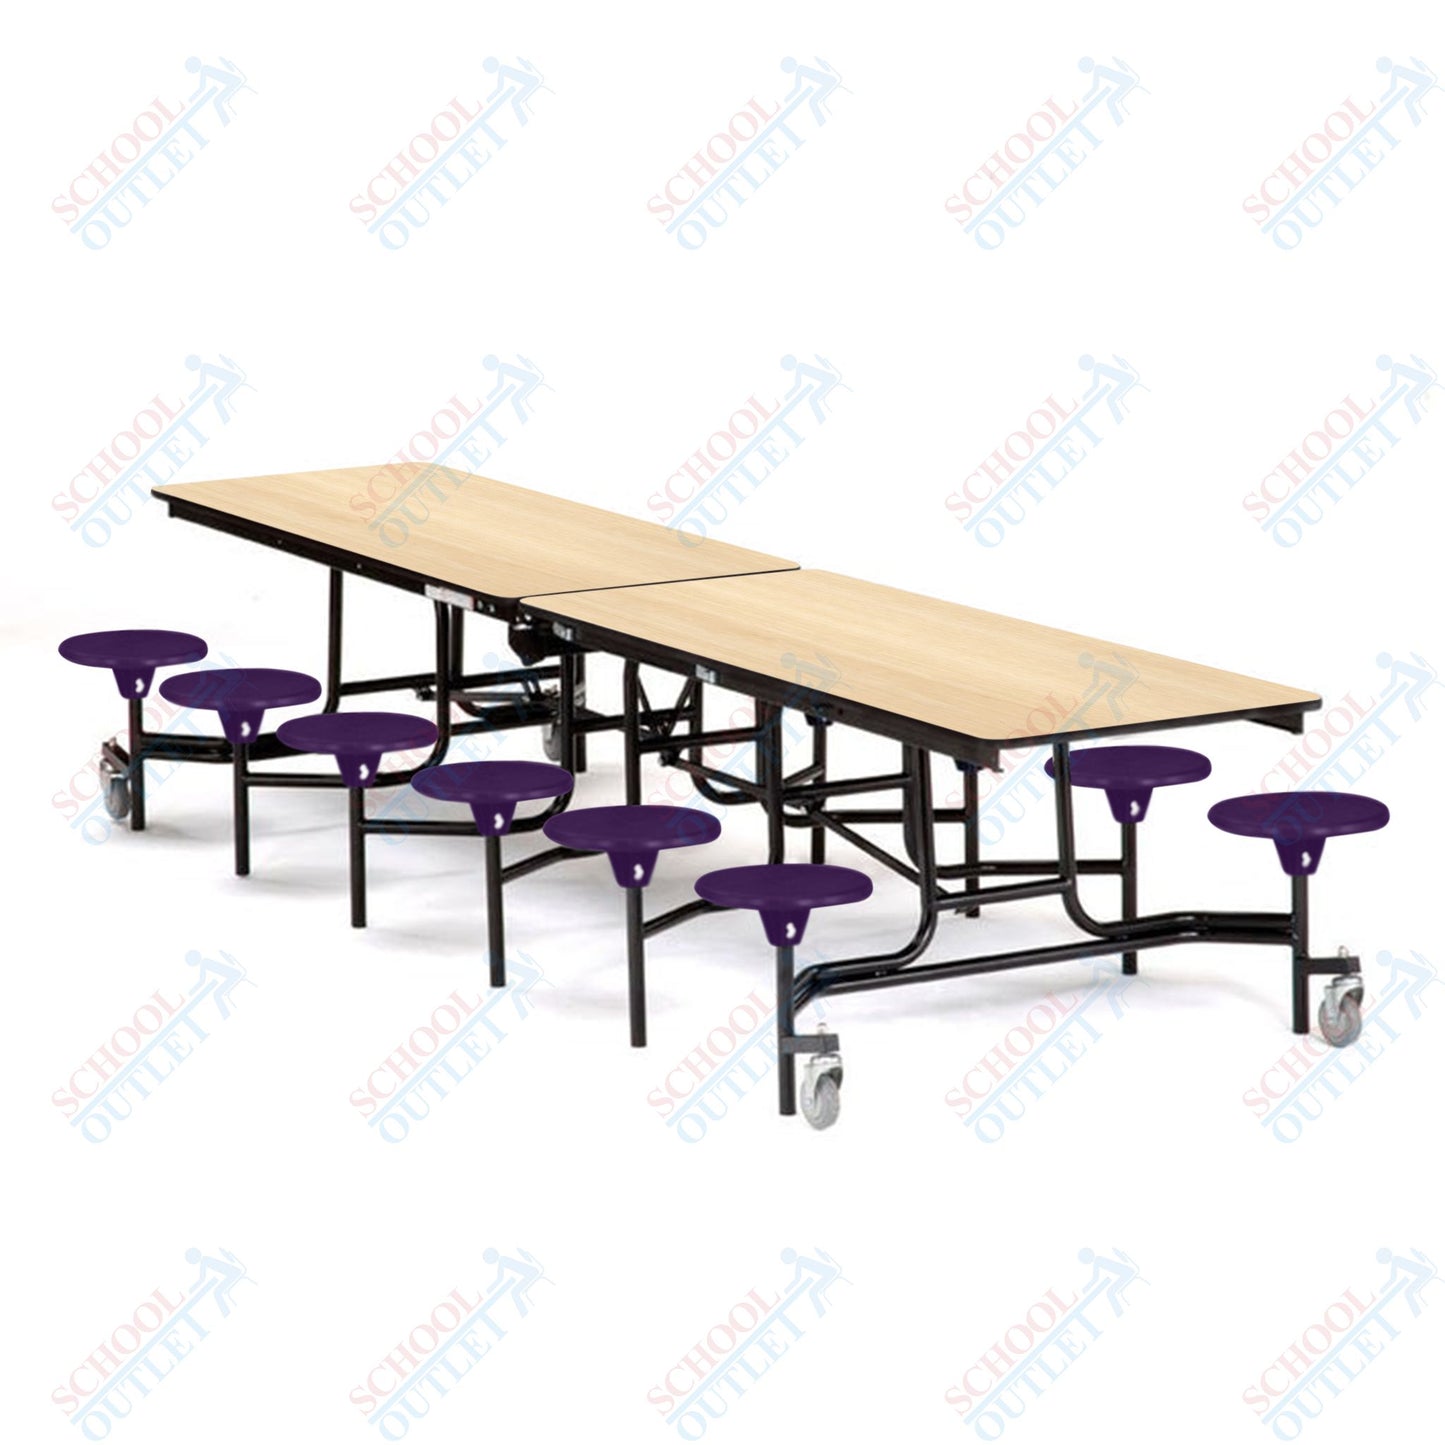 Mobile Cafeteria Lunchroom Stool Table - 30" W x 12' L - 12 Stools - MDF Core - Protect Edge - Chrome Frame